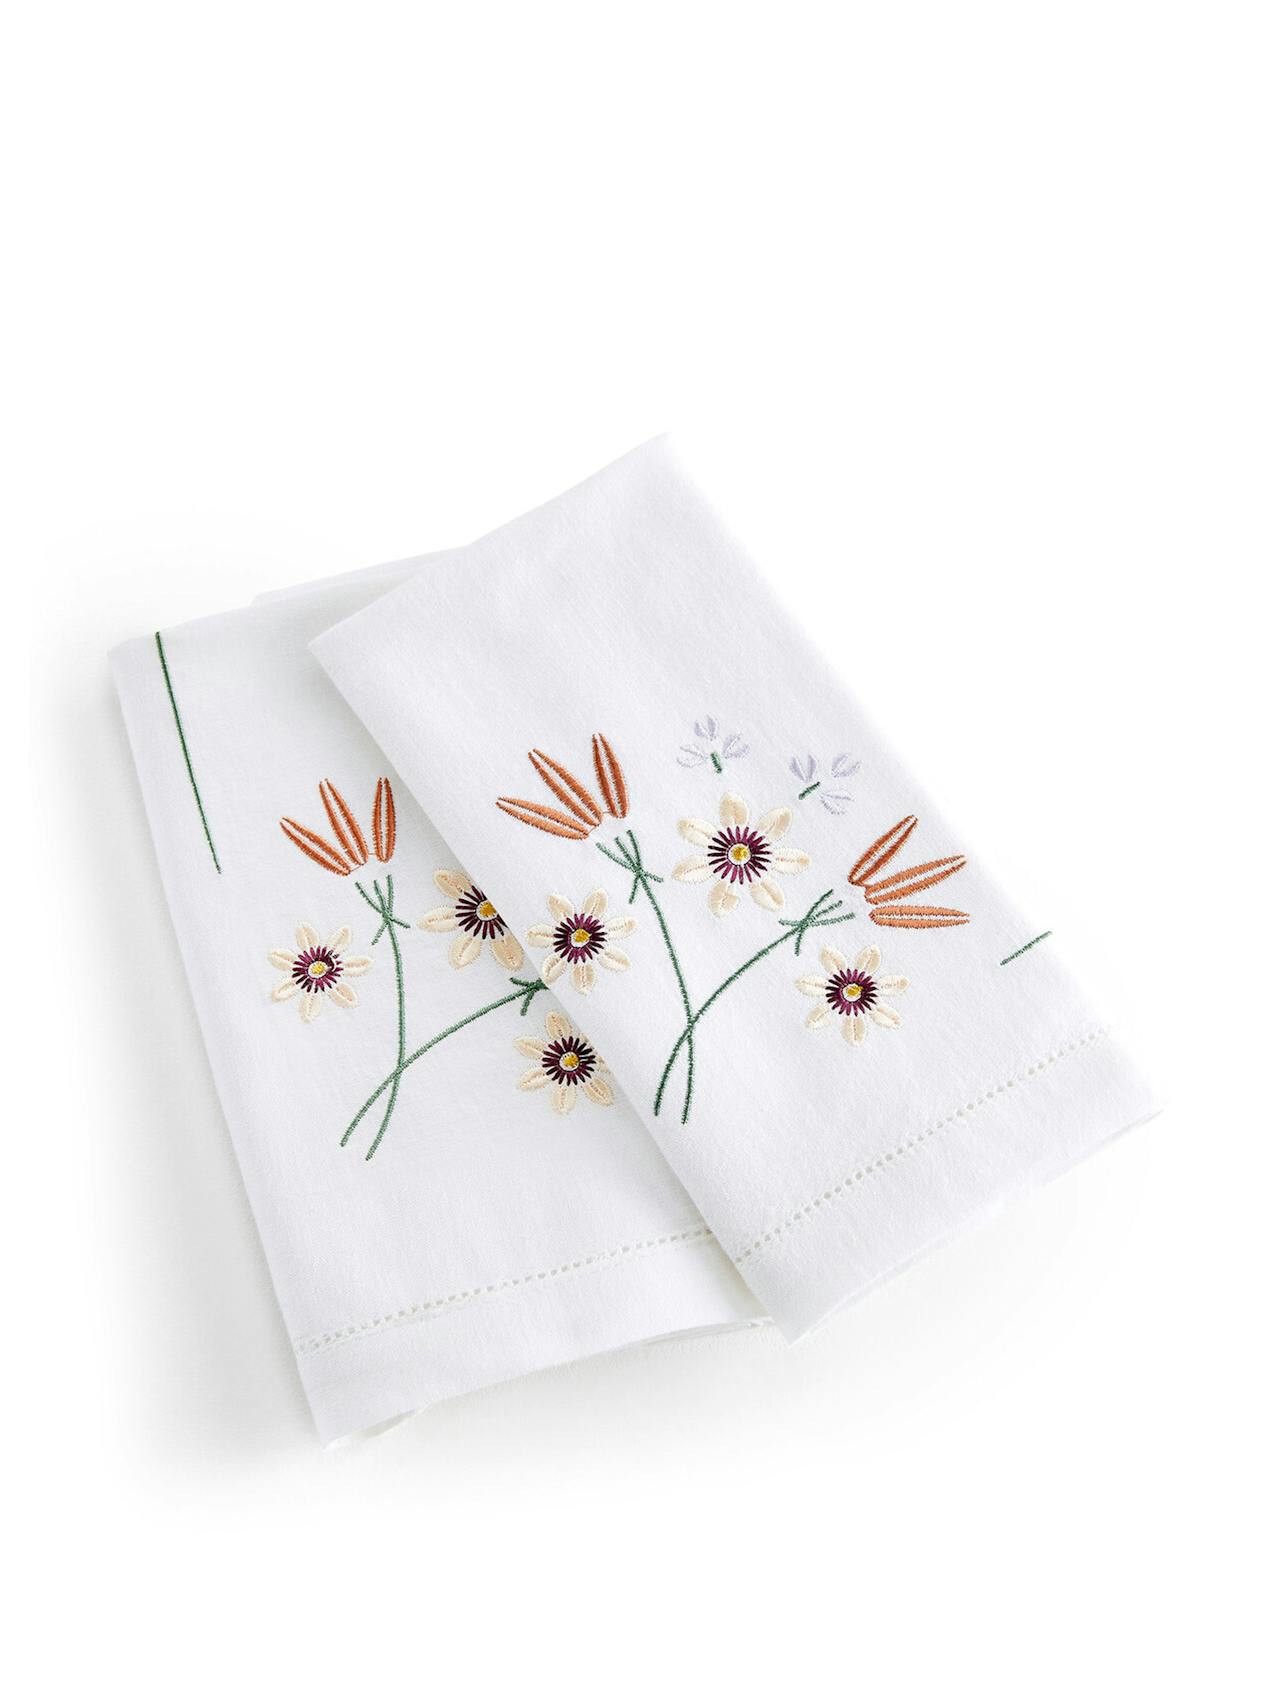 Martha embroidered floral cotton and linen napkins (set of 2)